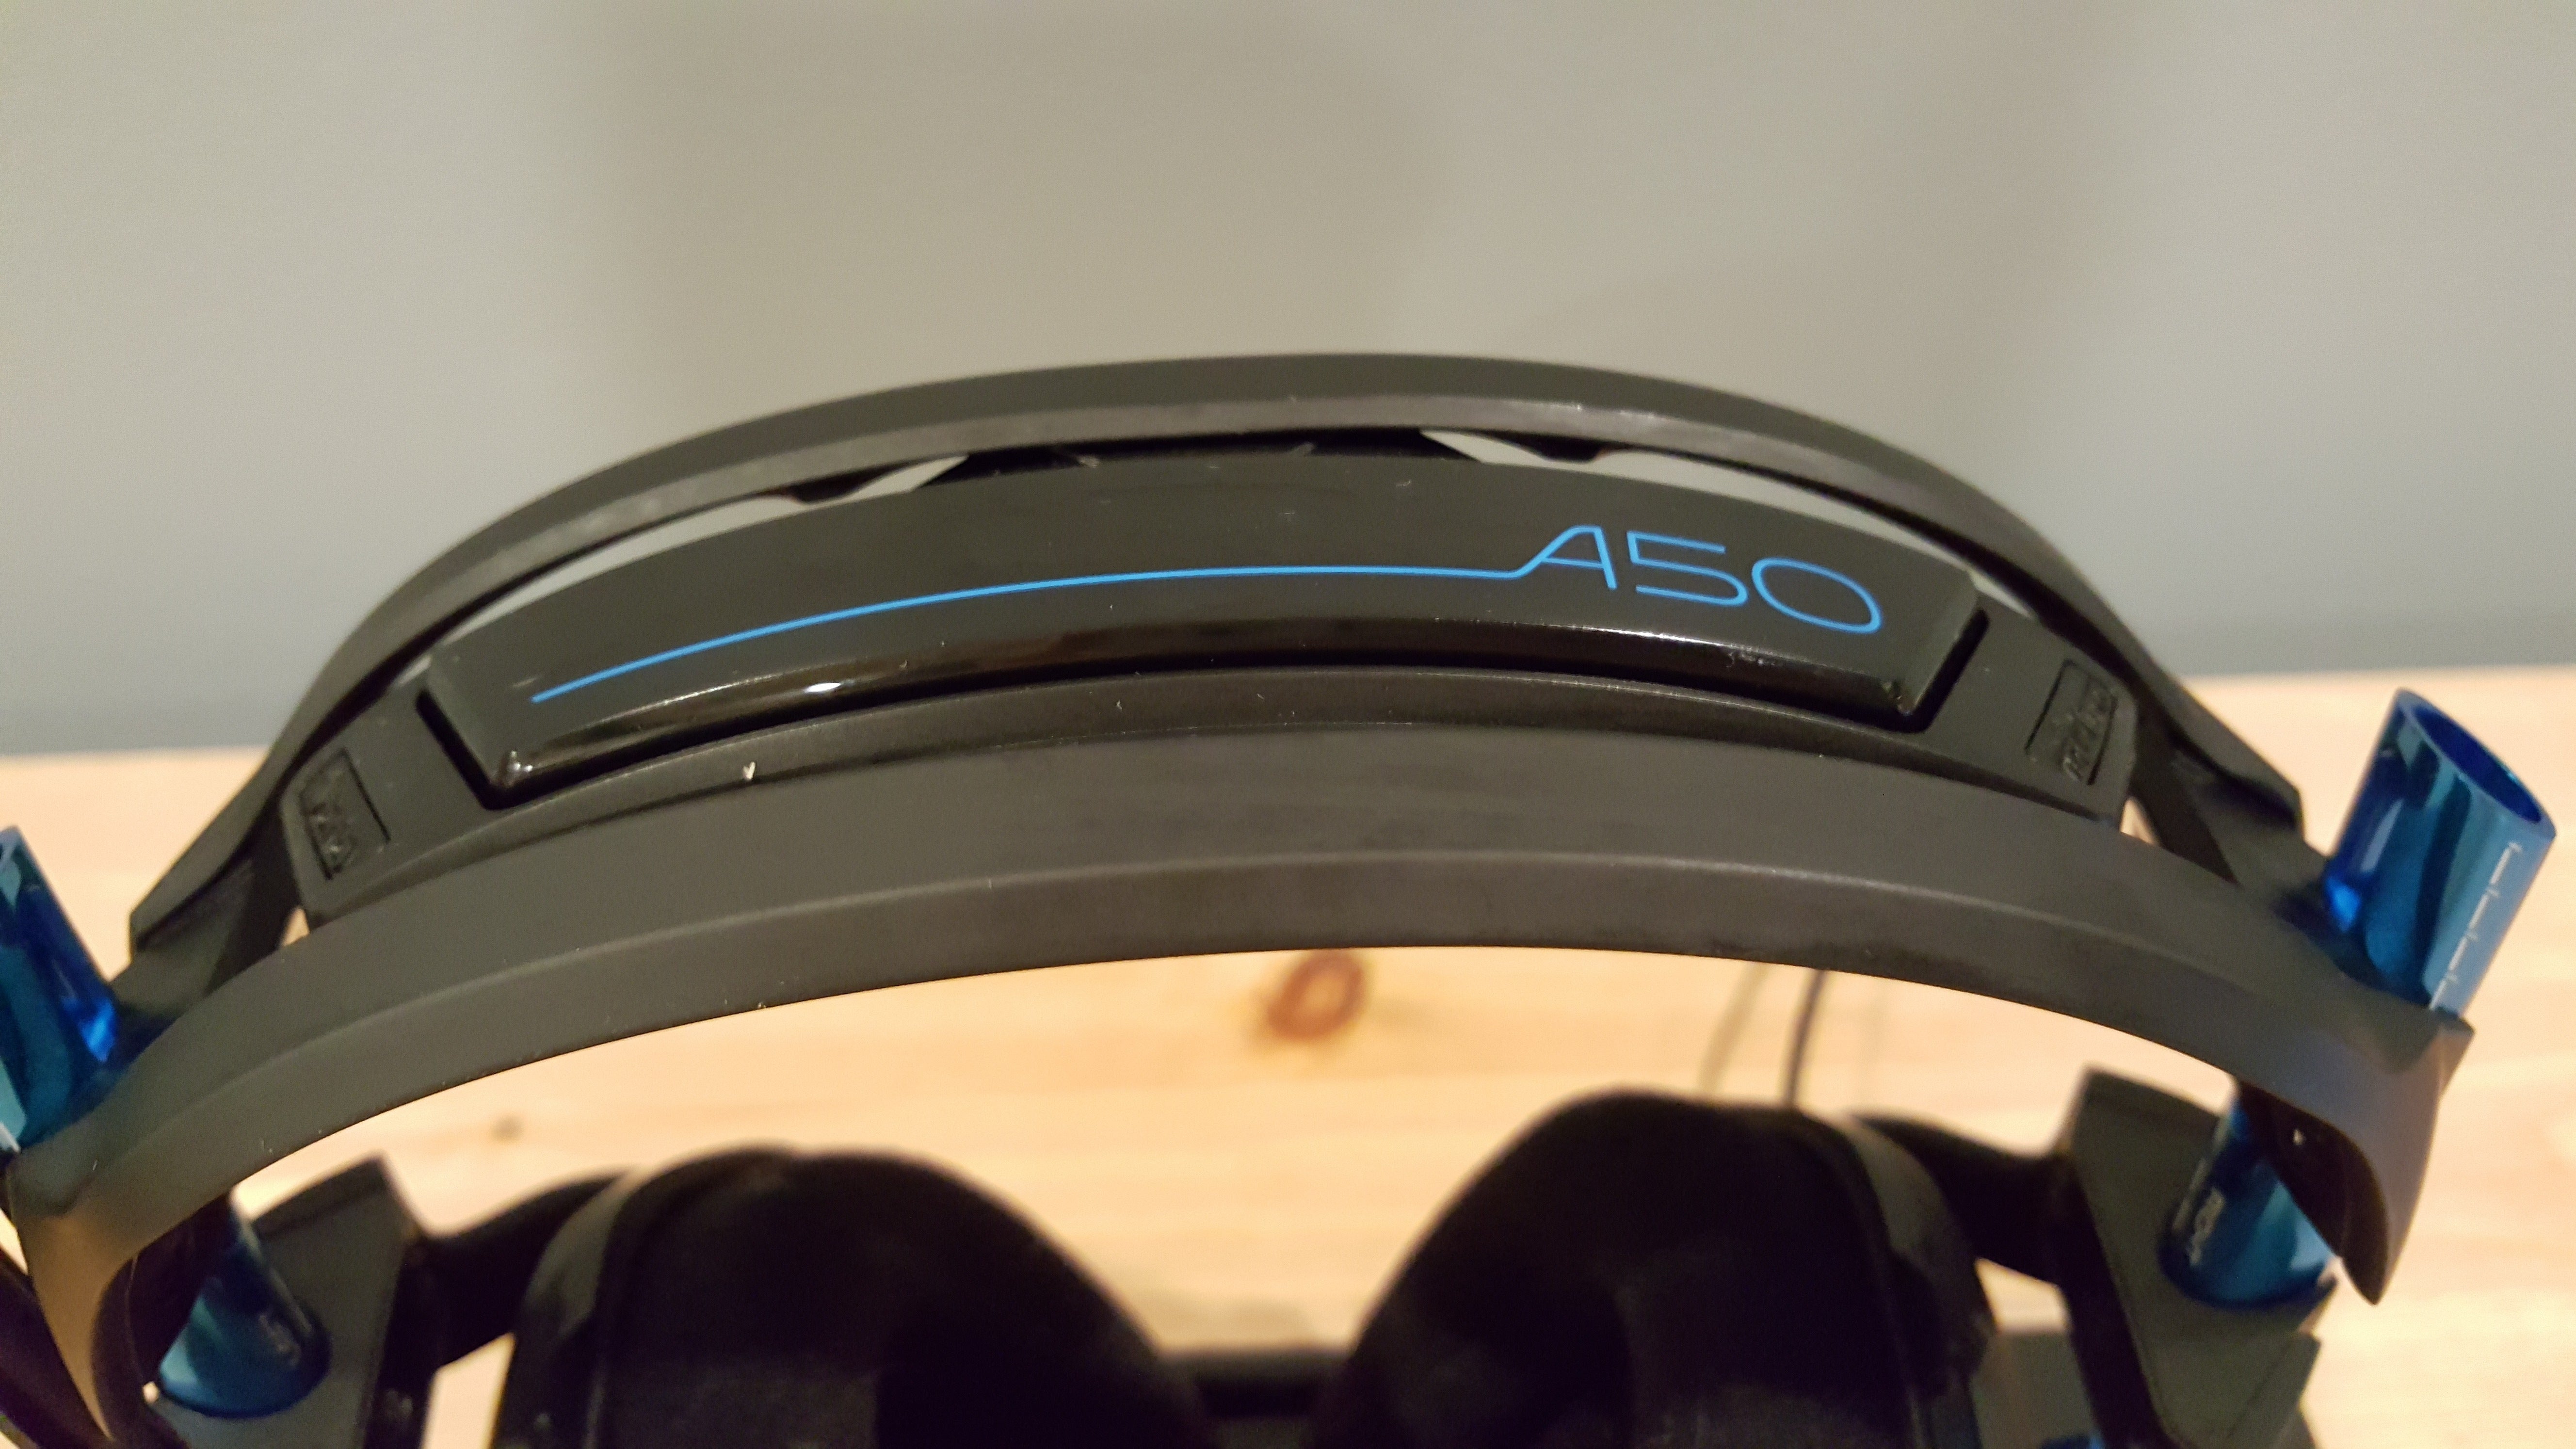 Astro A50 Wireless Gaming Headset (2016) review: The new Astro A50